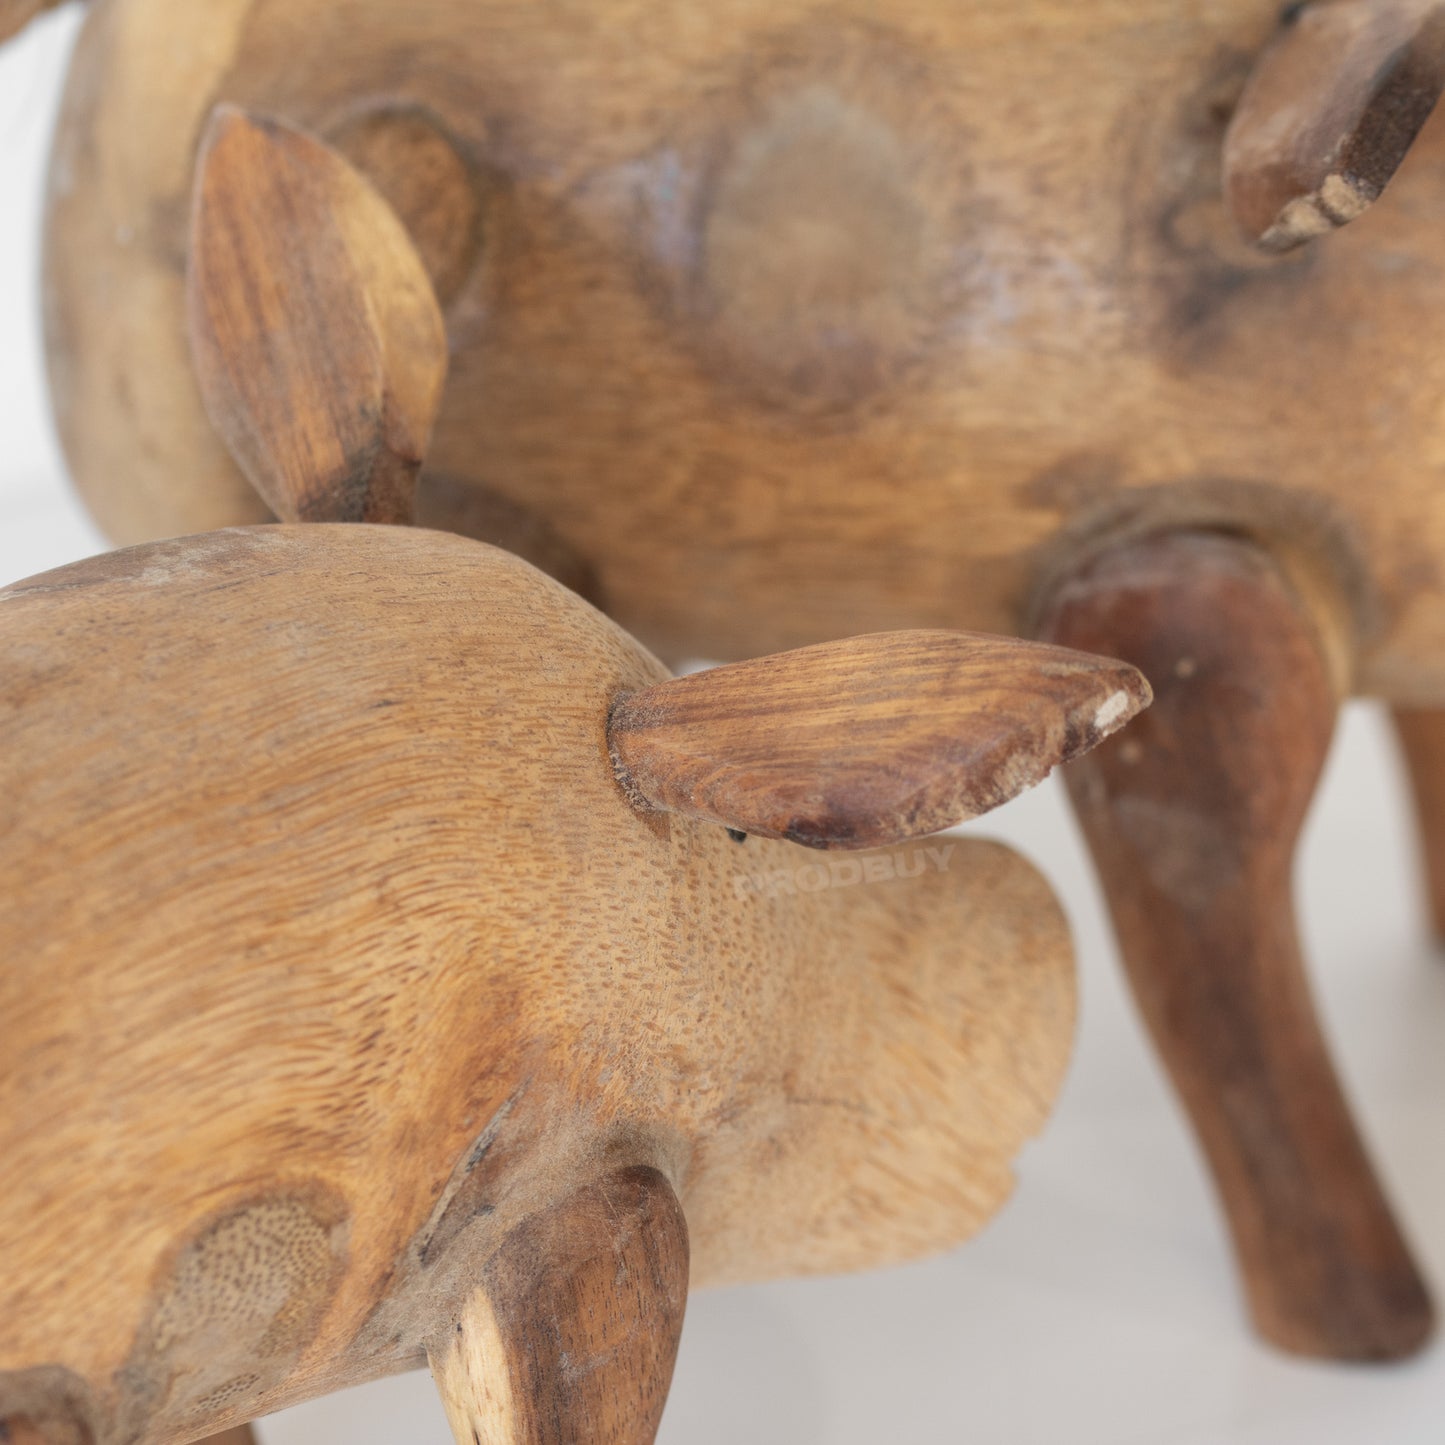 Set of 3 Hand Carved Wooden Pig Ornaments